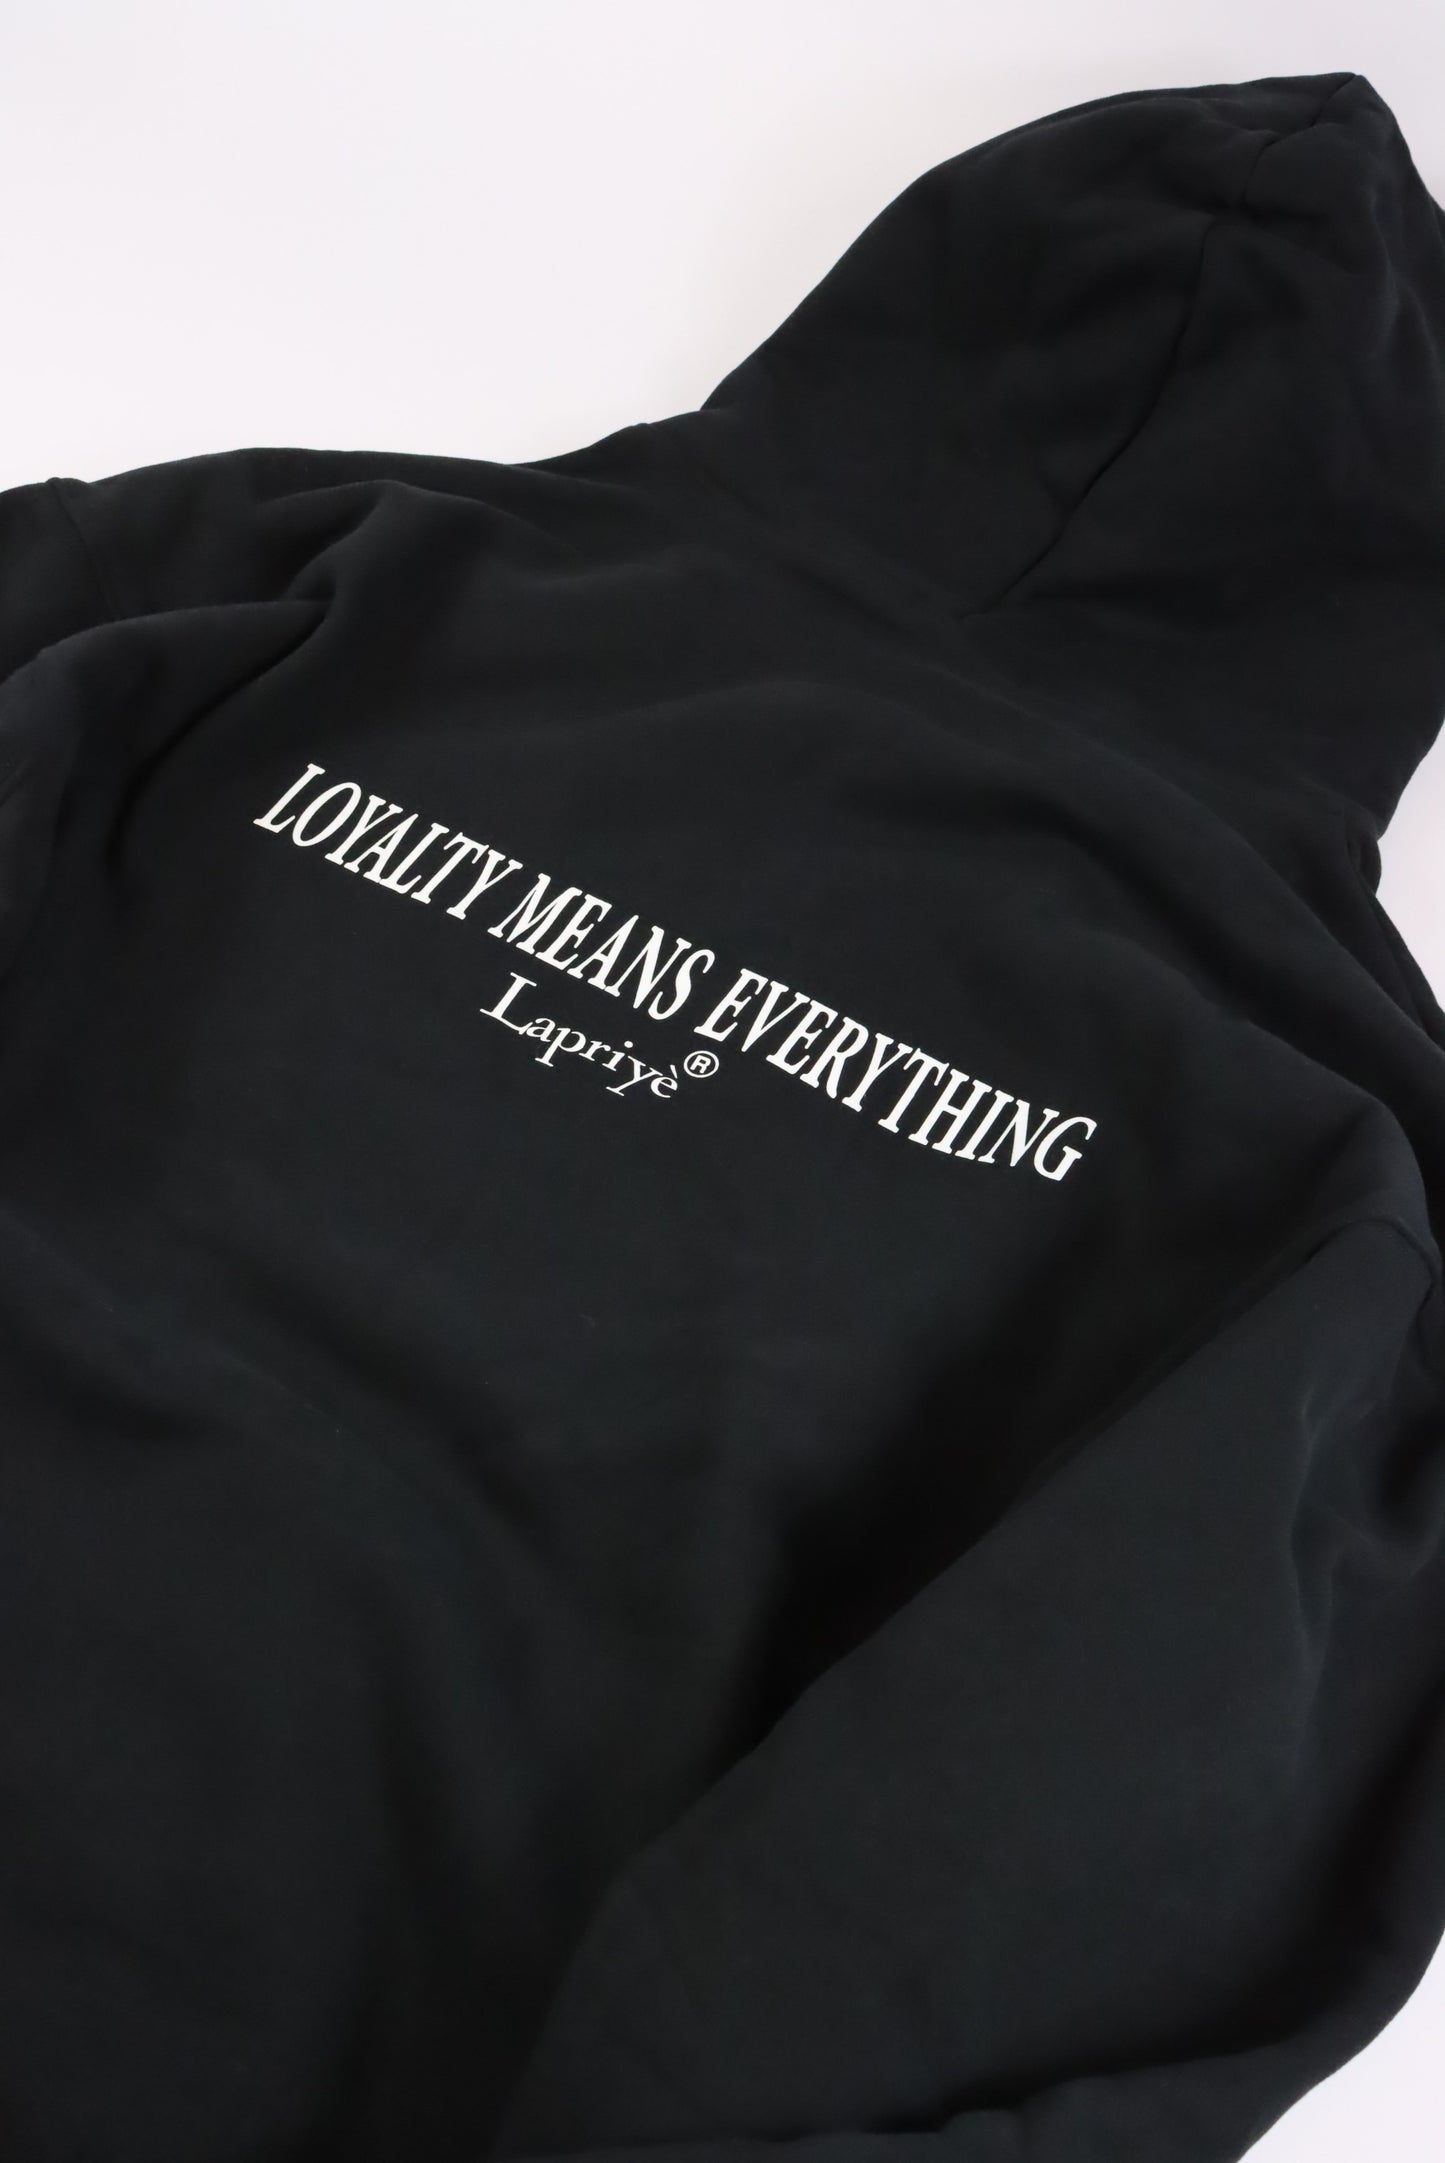 LOYALTY MEANS EVERYTHING OVERSIZED HOODIE IN BLACK